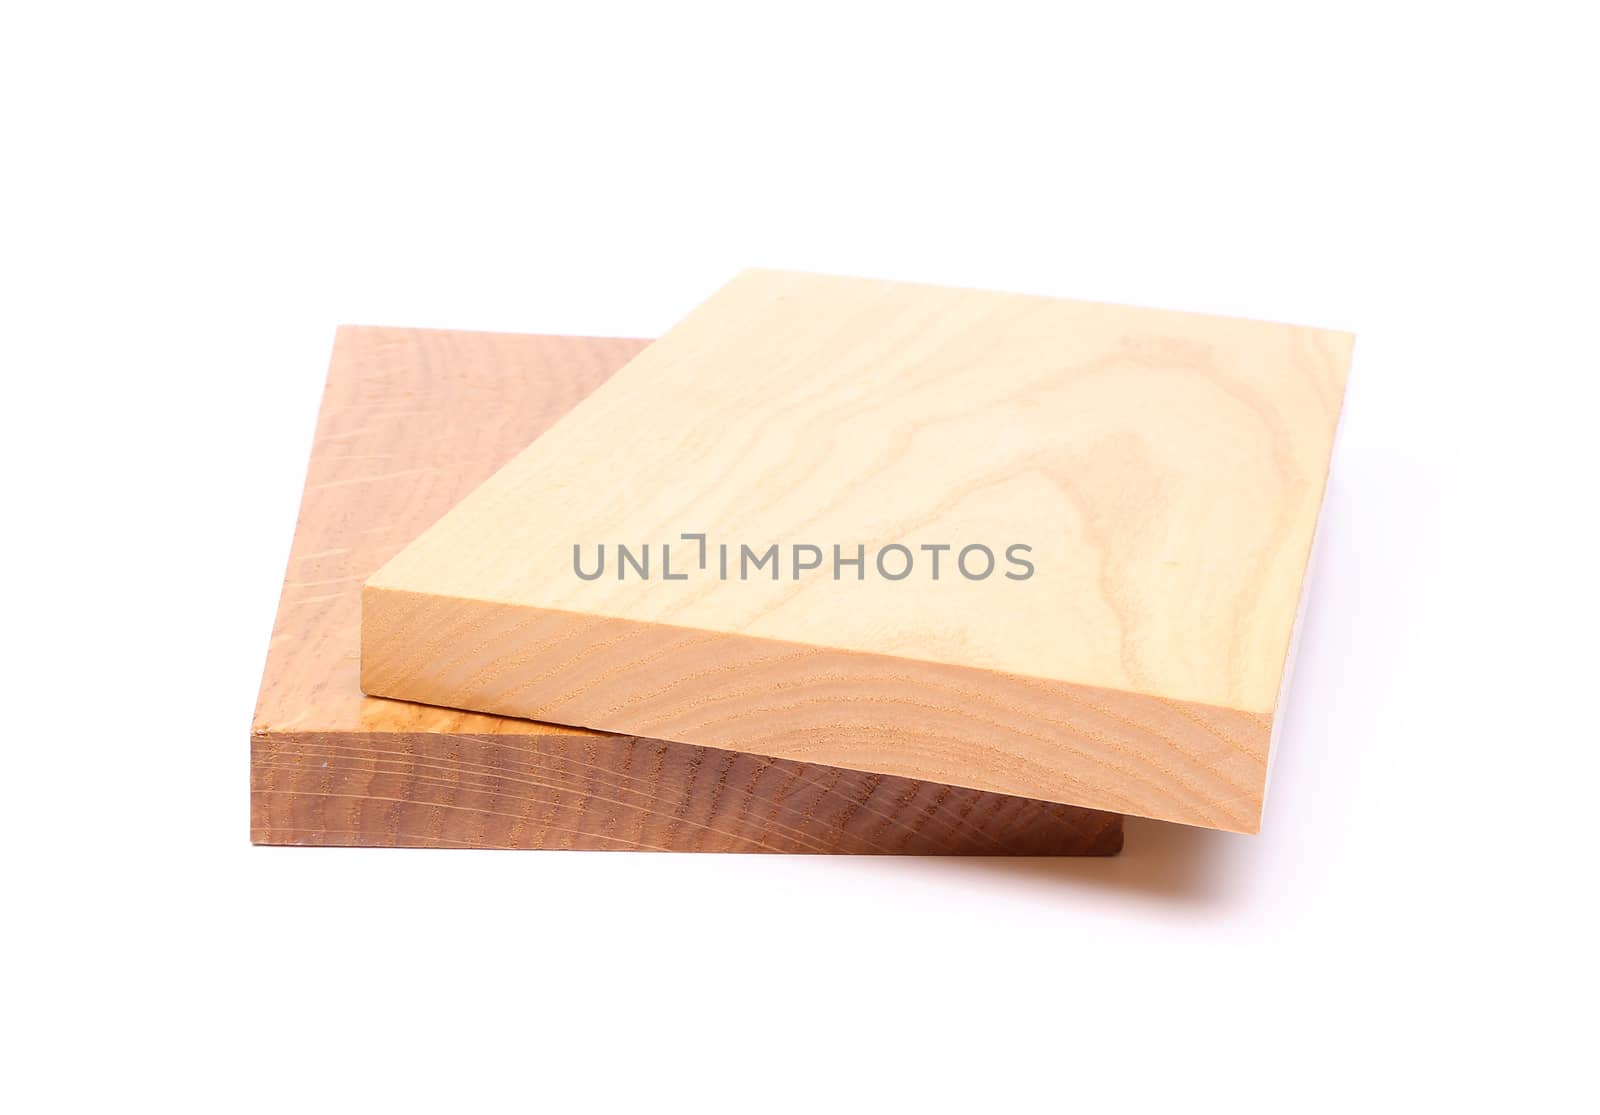 Two wooden plank close-up are located on the white background